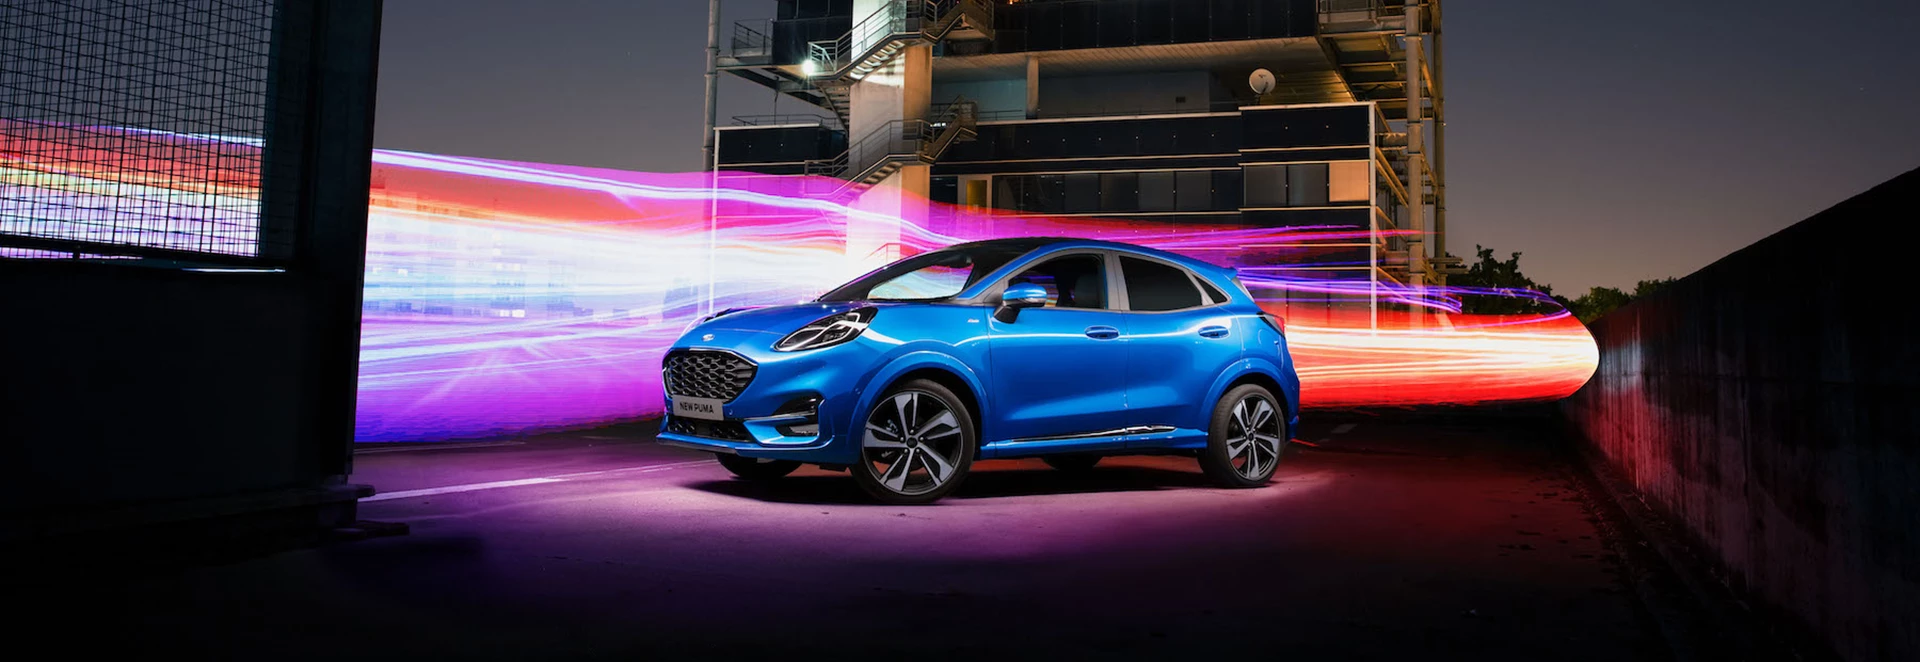 7 important new cars arriving in 2020